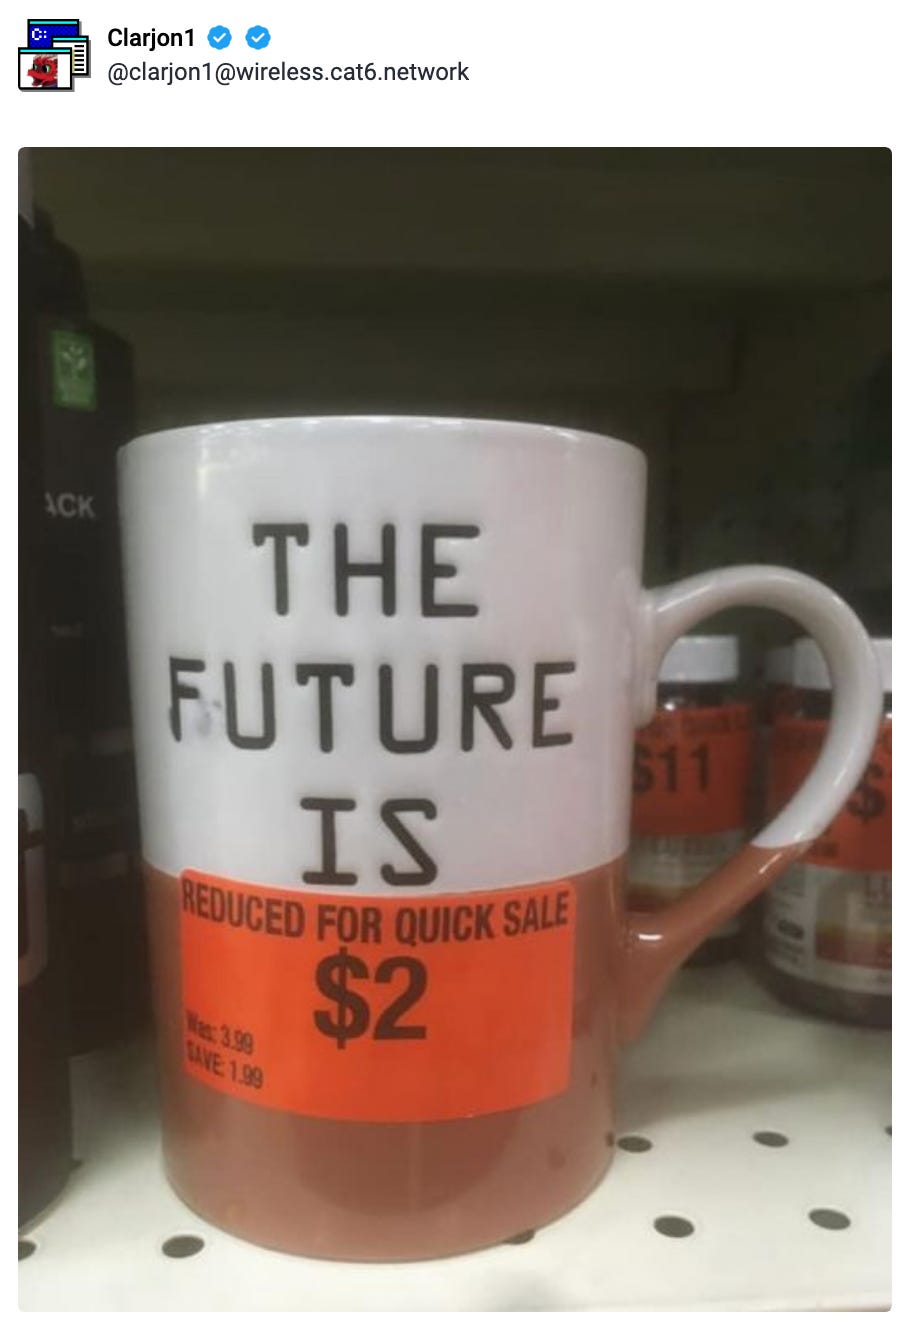 The Future Is Reduced For Quick Sale